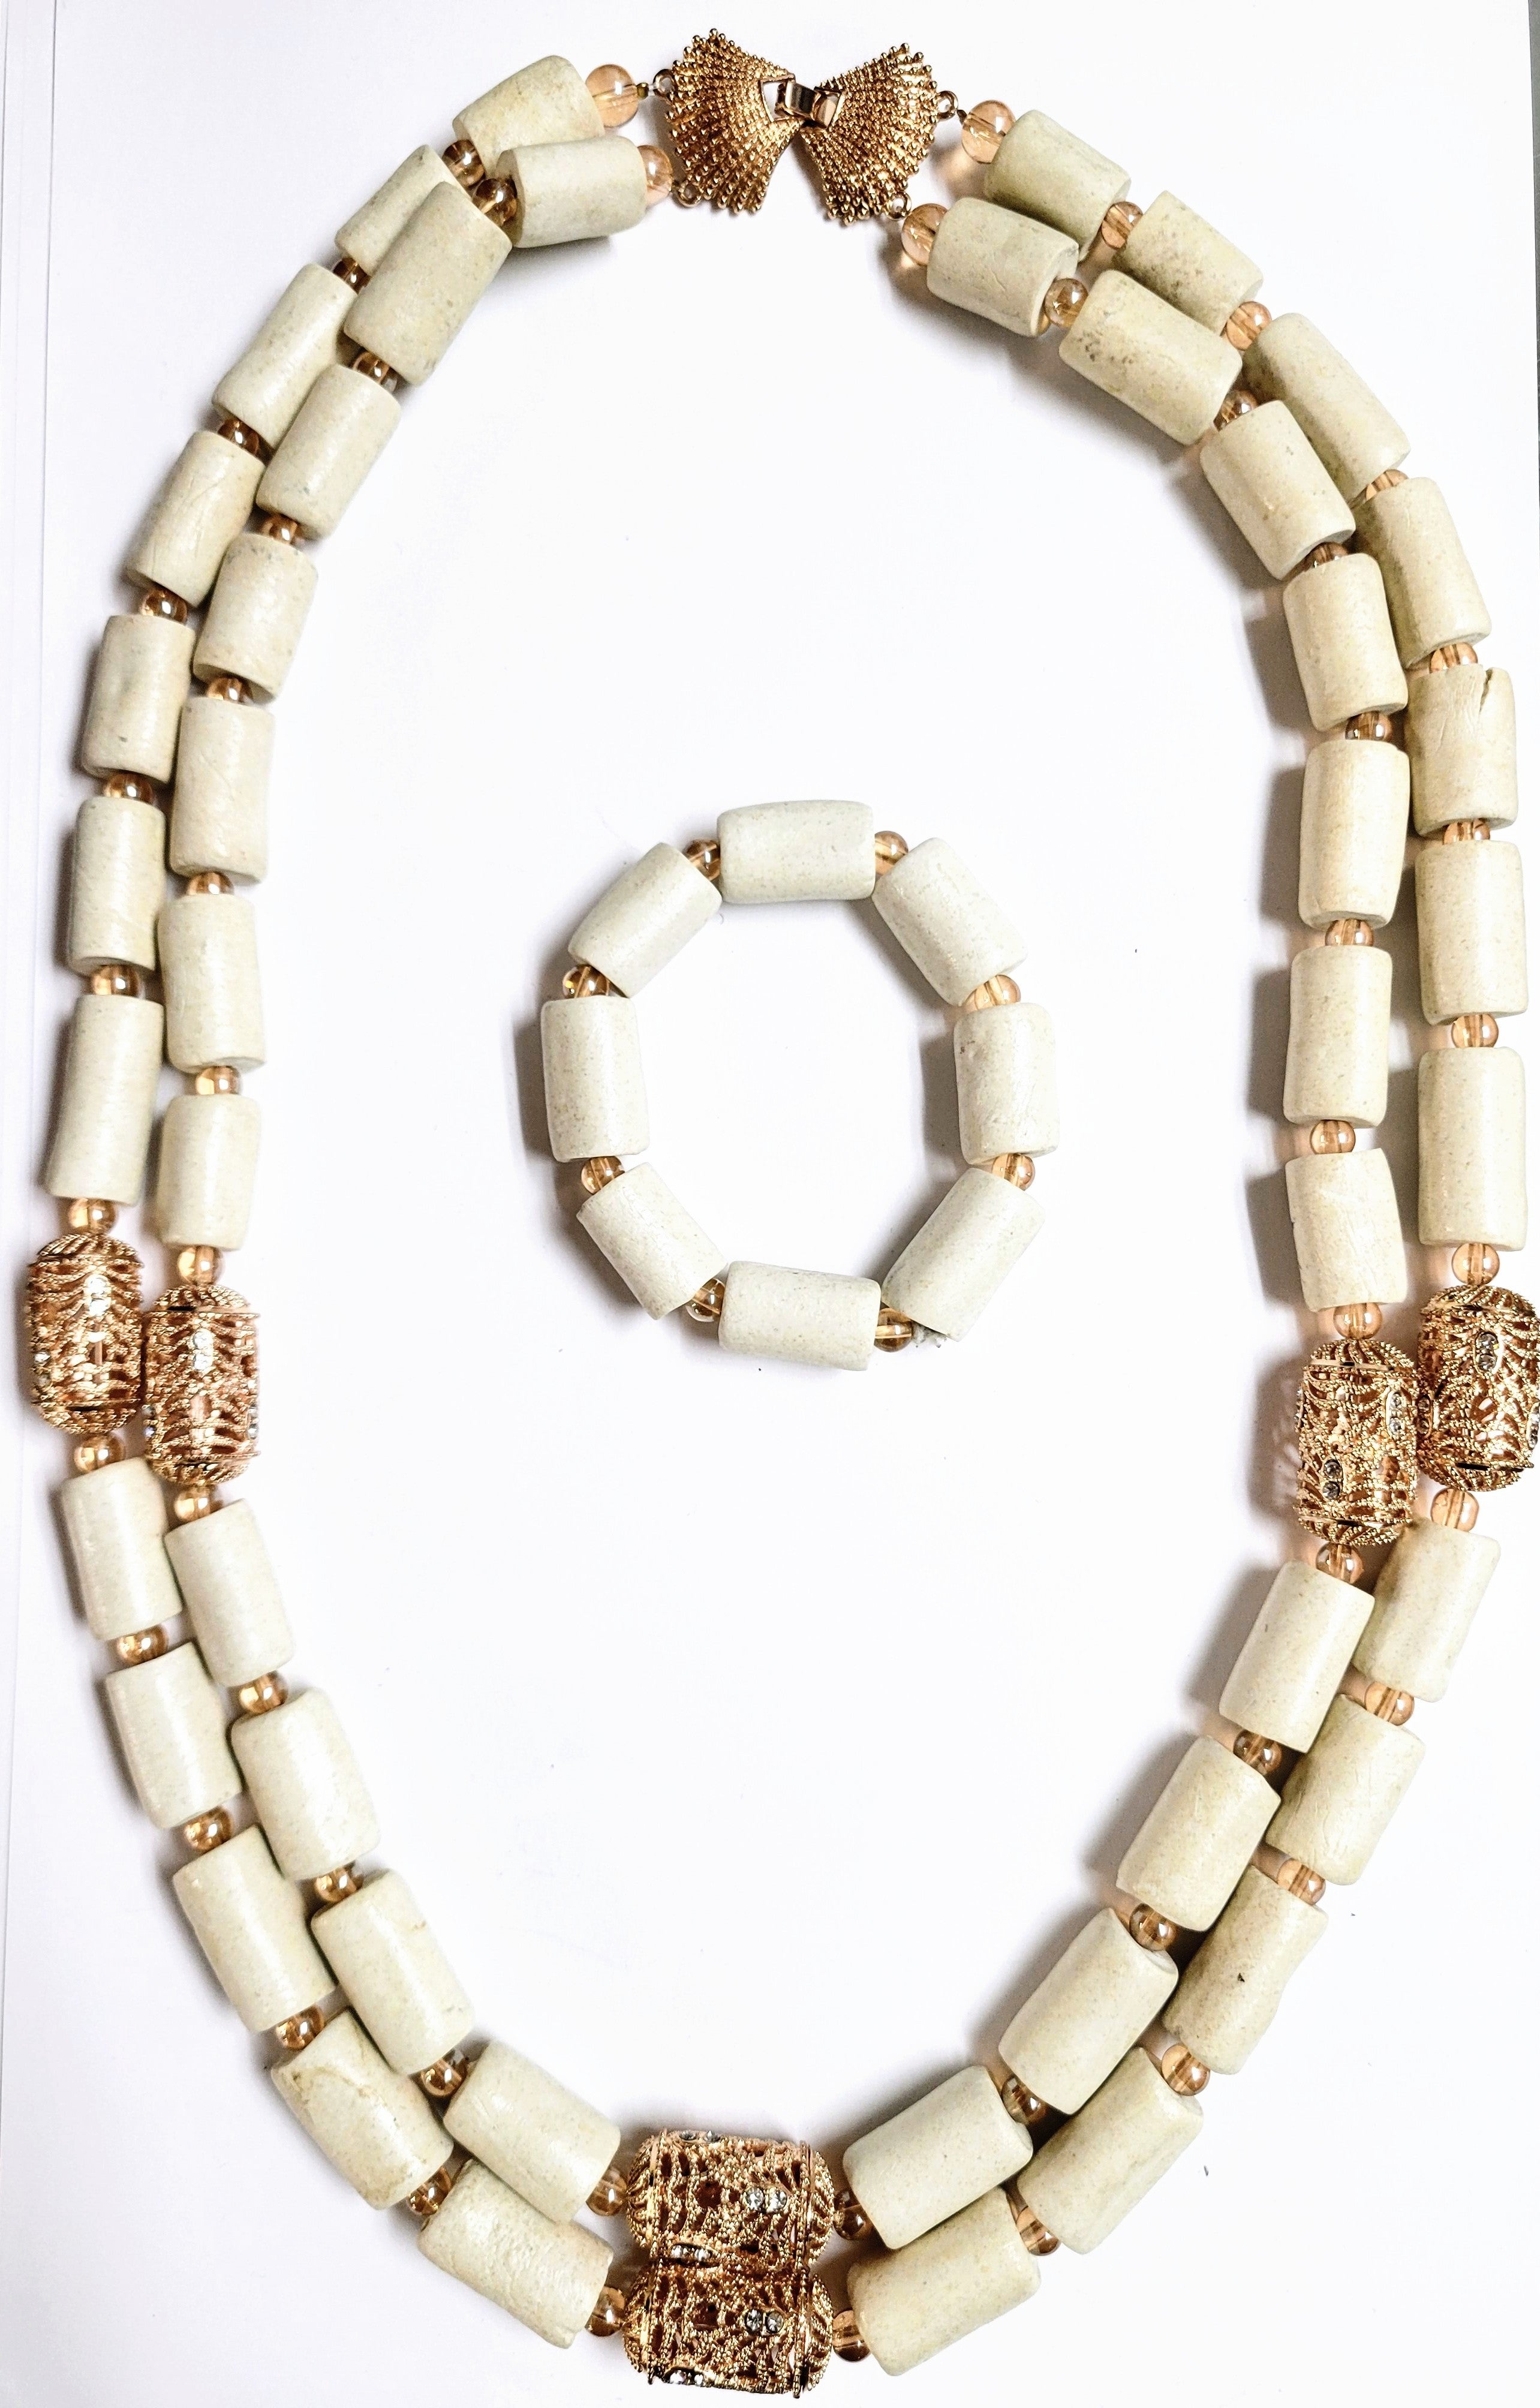 Ivory and Gold African ileke bead necklace and bracelet set-DPJIBIG5